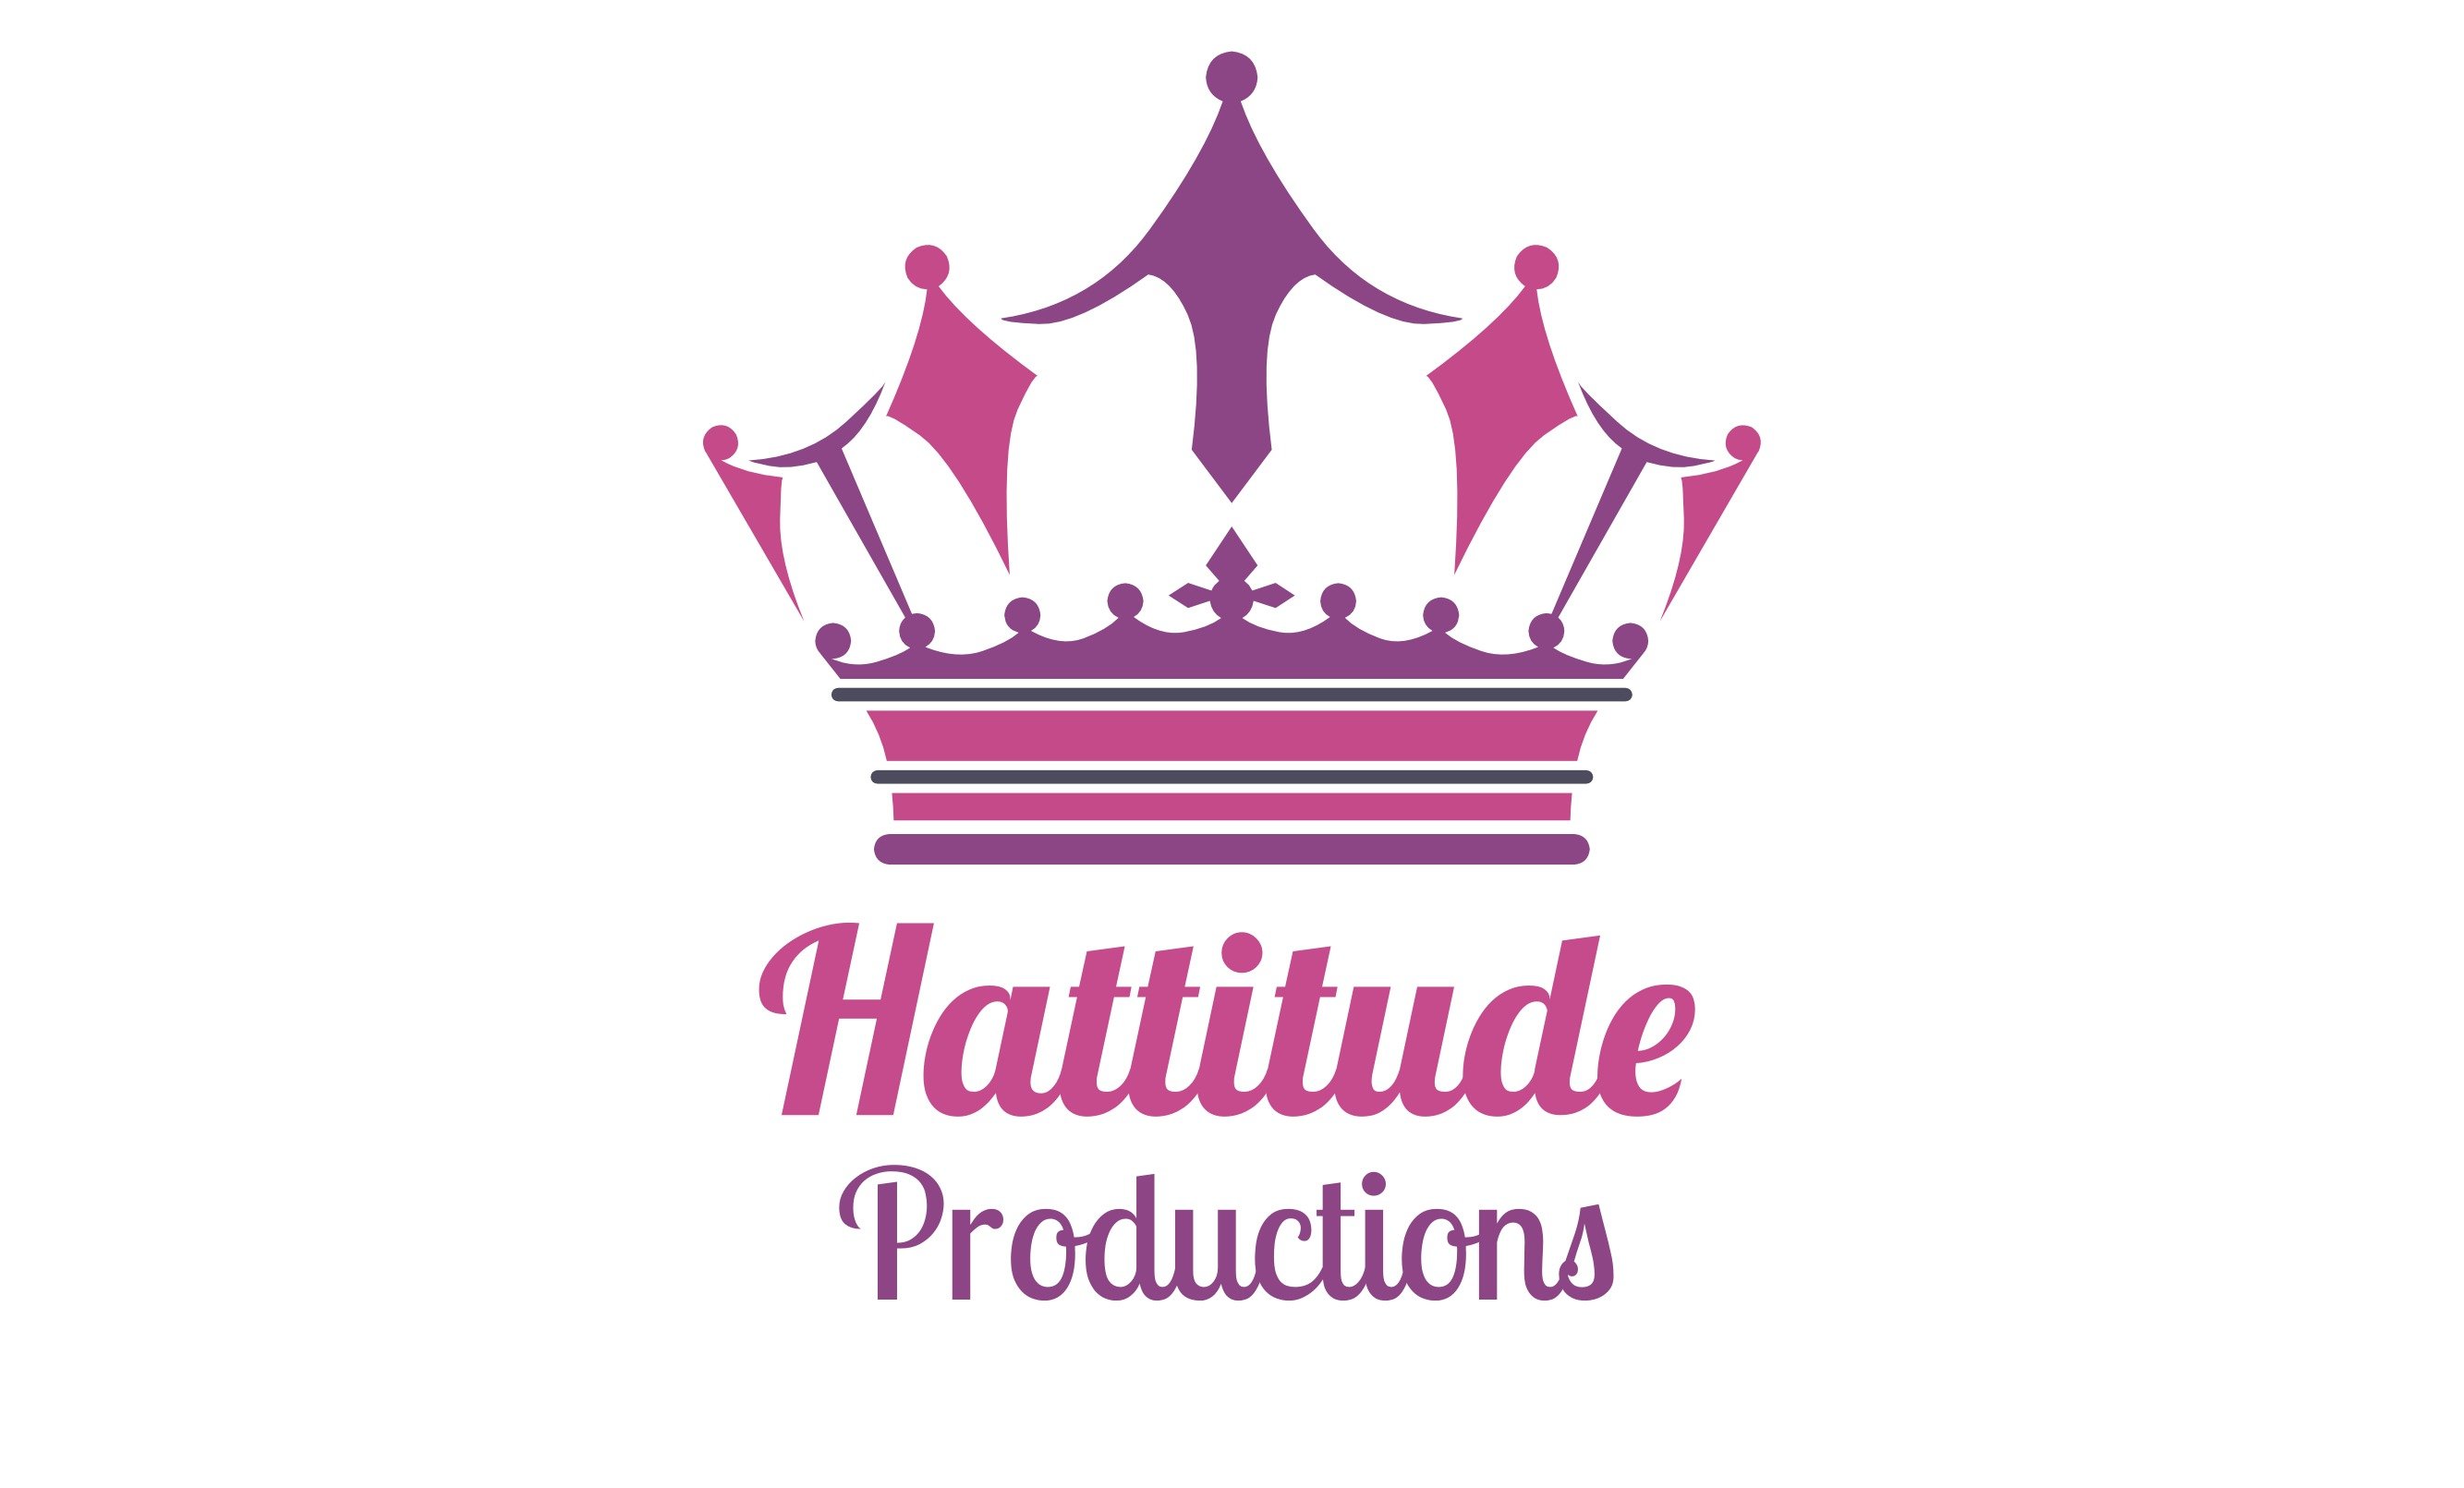 Hattitude Productions is a media production company that tops the lot. Creating media content for women by women. Watch this space!